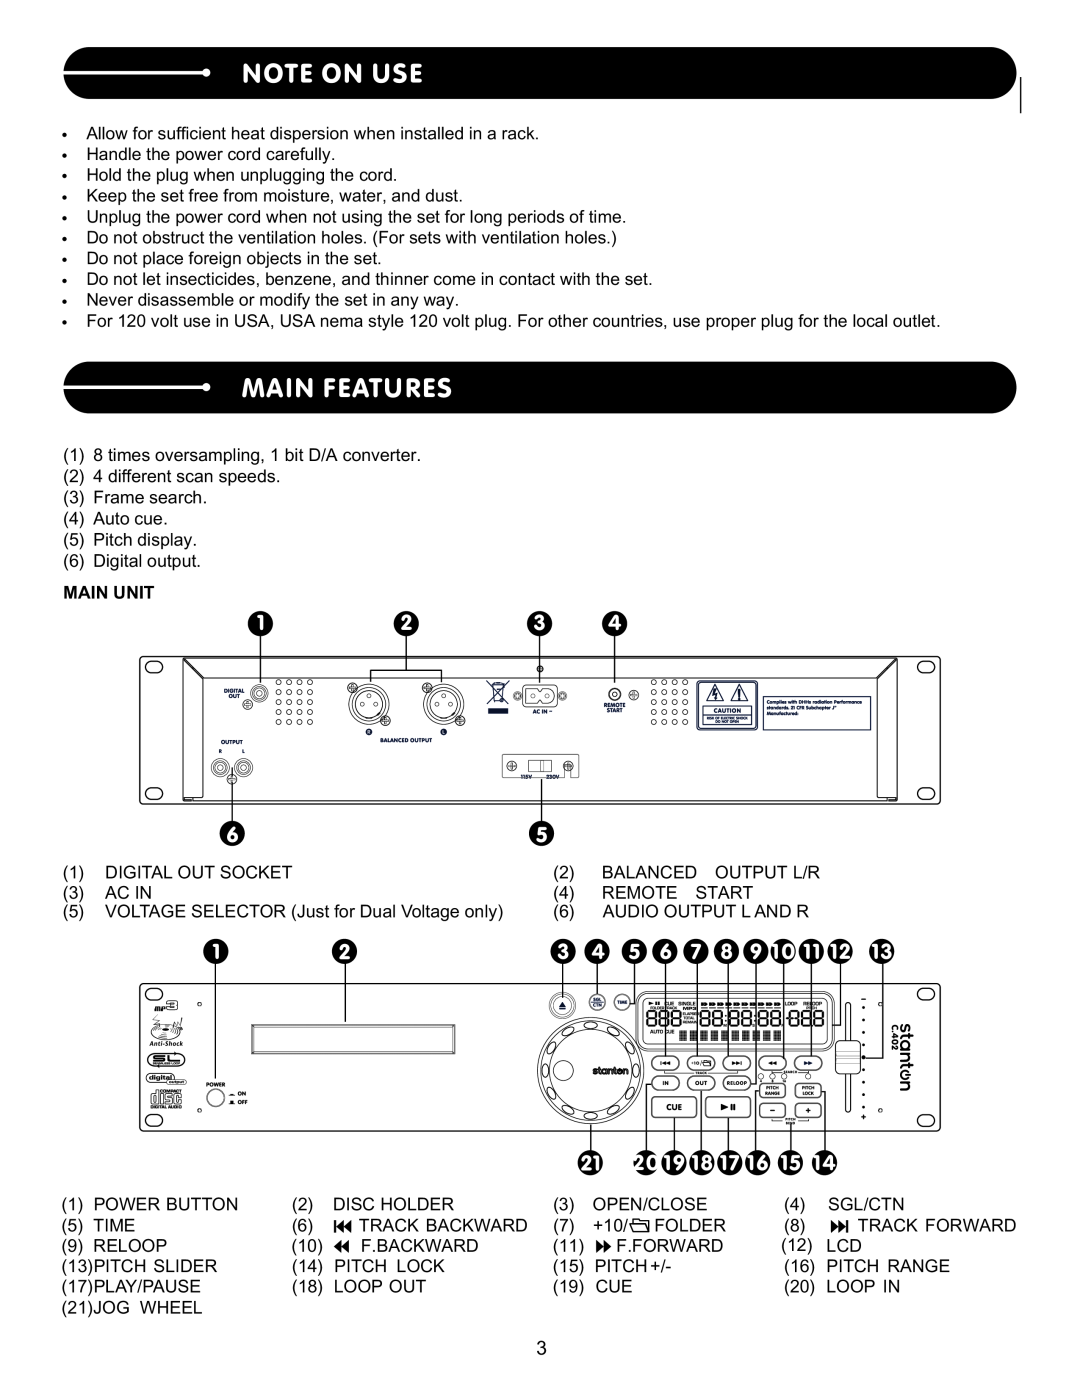 Stanton C.402 user manual Note On Use, Main Features, 9 10, Main Unit 